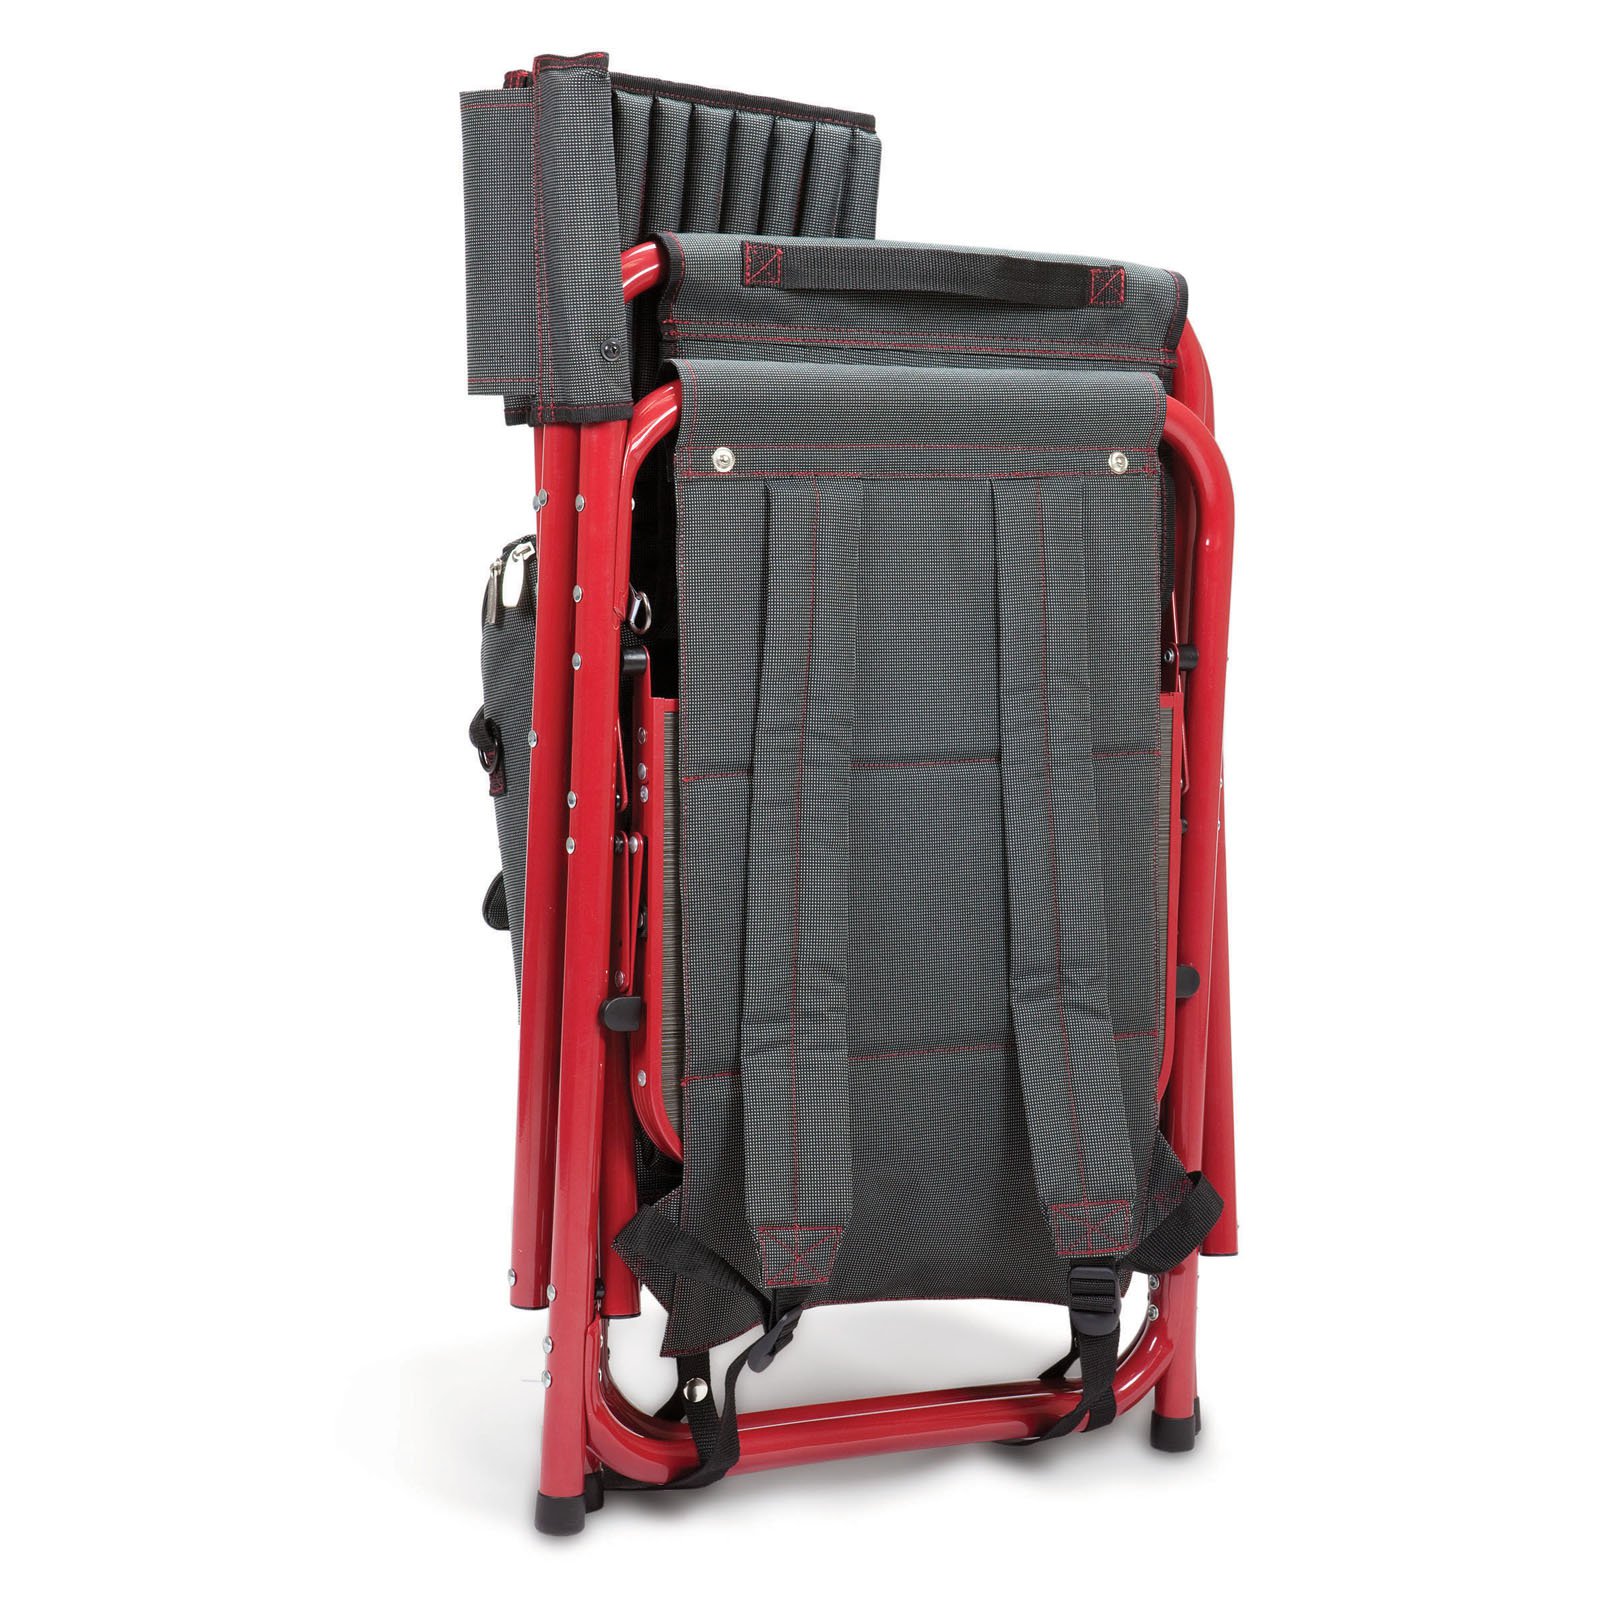 Picnic Time Fusion Directors Chair - Dark Gray with Red - image 2 of 4